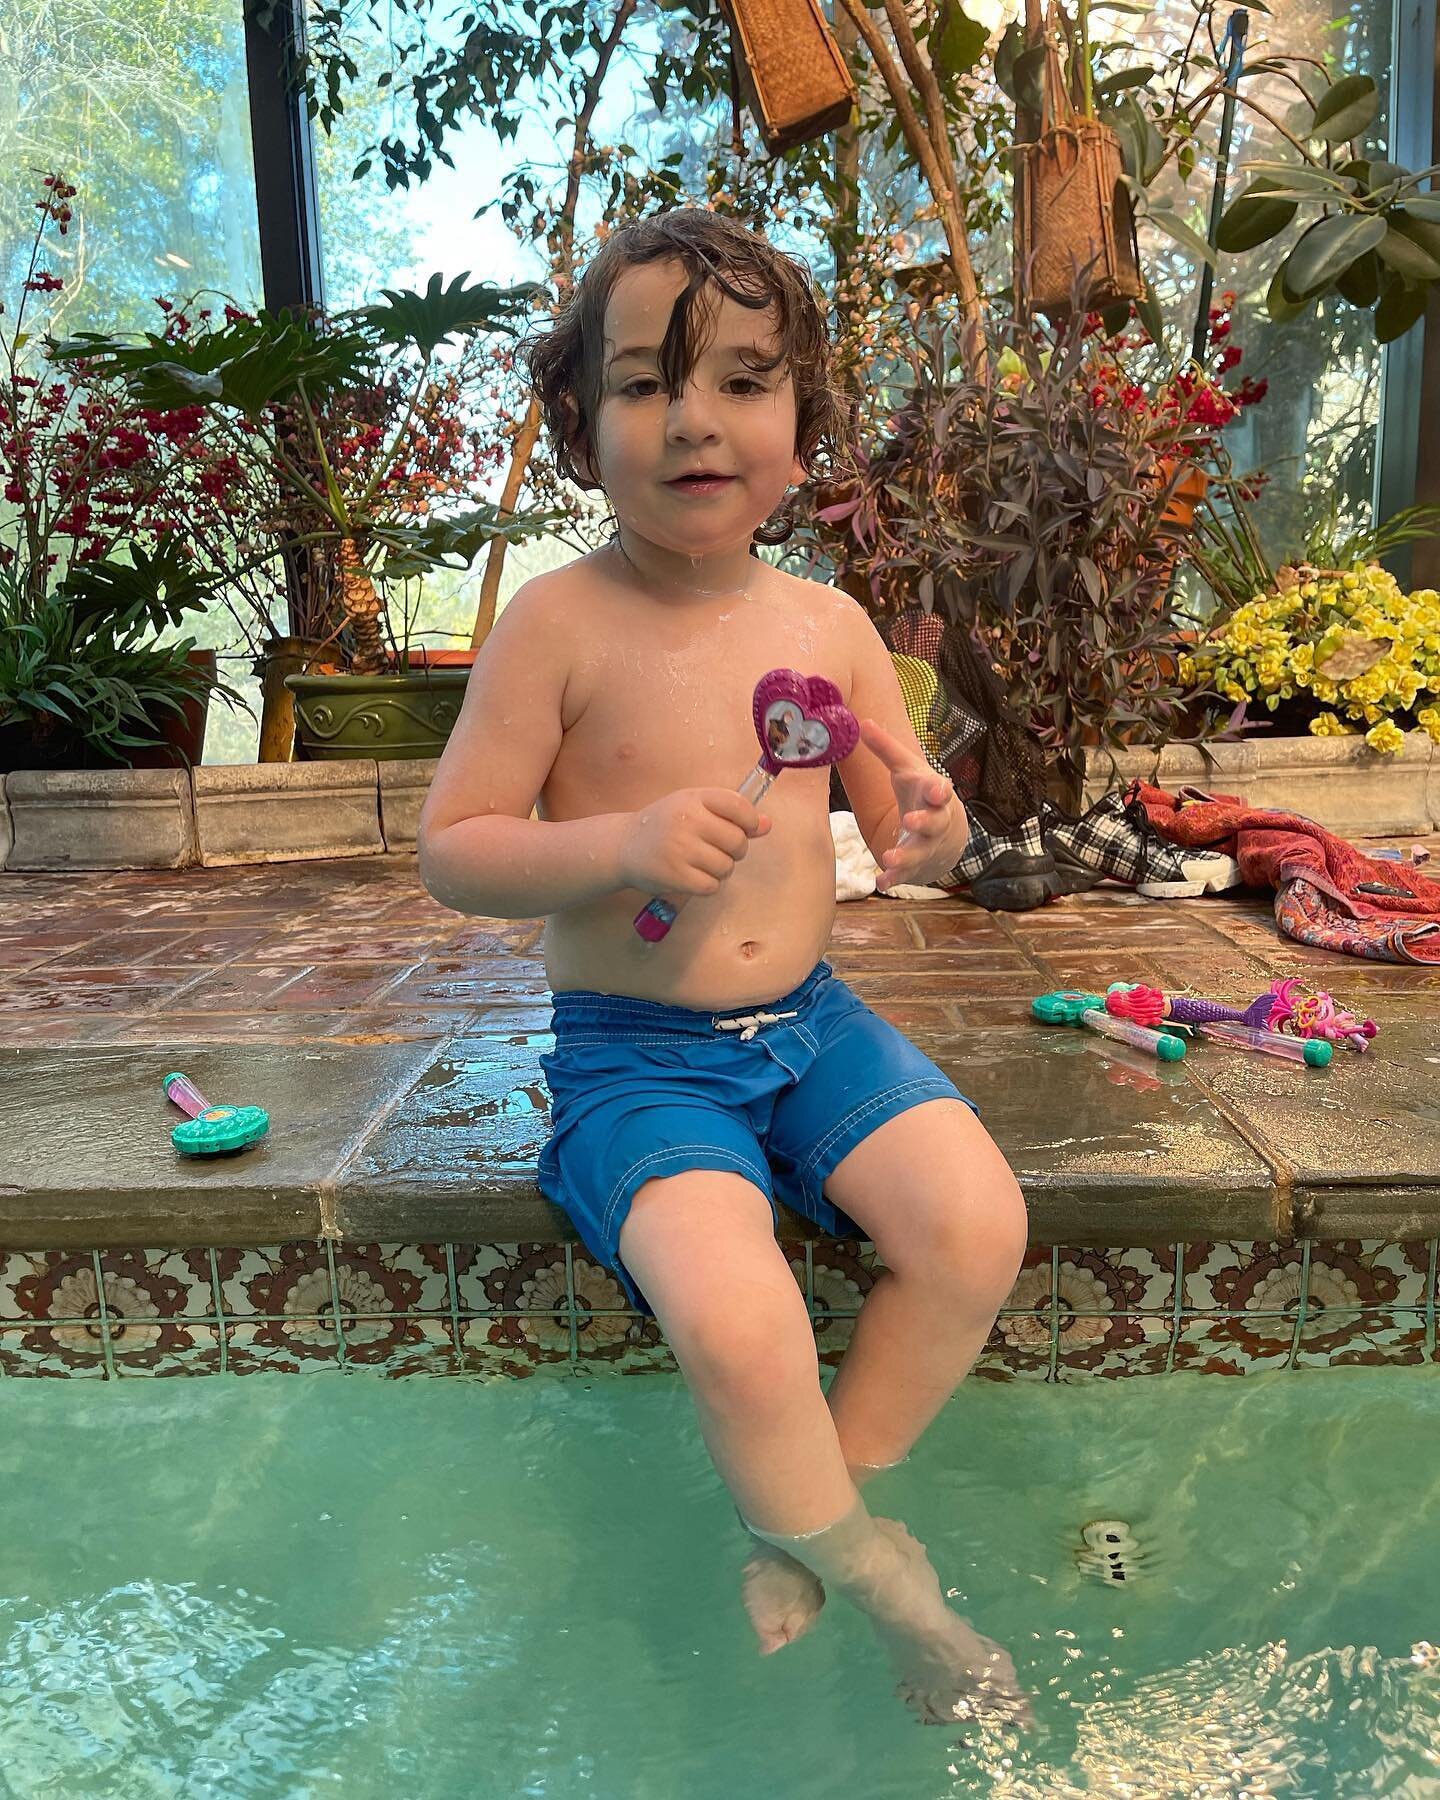 Nothing like indoor swim lessons at your house on a beautiful day ☀️ 🐡 🧞&zwj;♀️ 🧜🏻&zwj;♀️ 
.
.
.
.
.
.
#indoorswimmingpool #indoorswimlessons #phillyswim #mainlineswimlessons #swimlessons #philadelphiaswim #pennvalley #pennvalleyswimlessons #baby